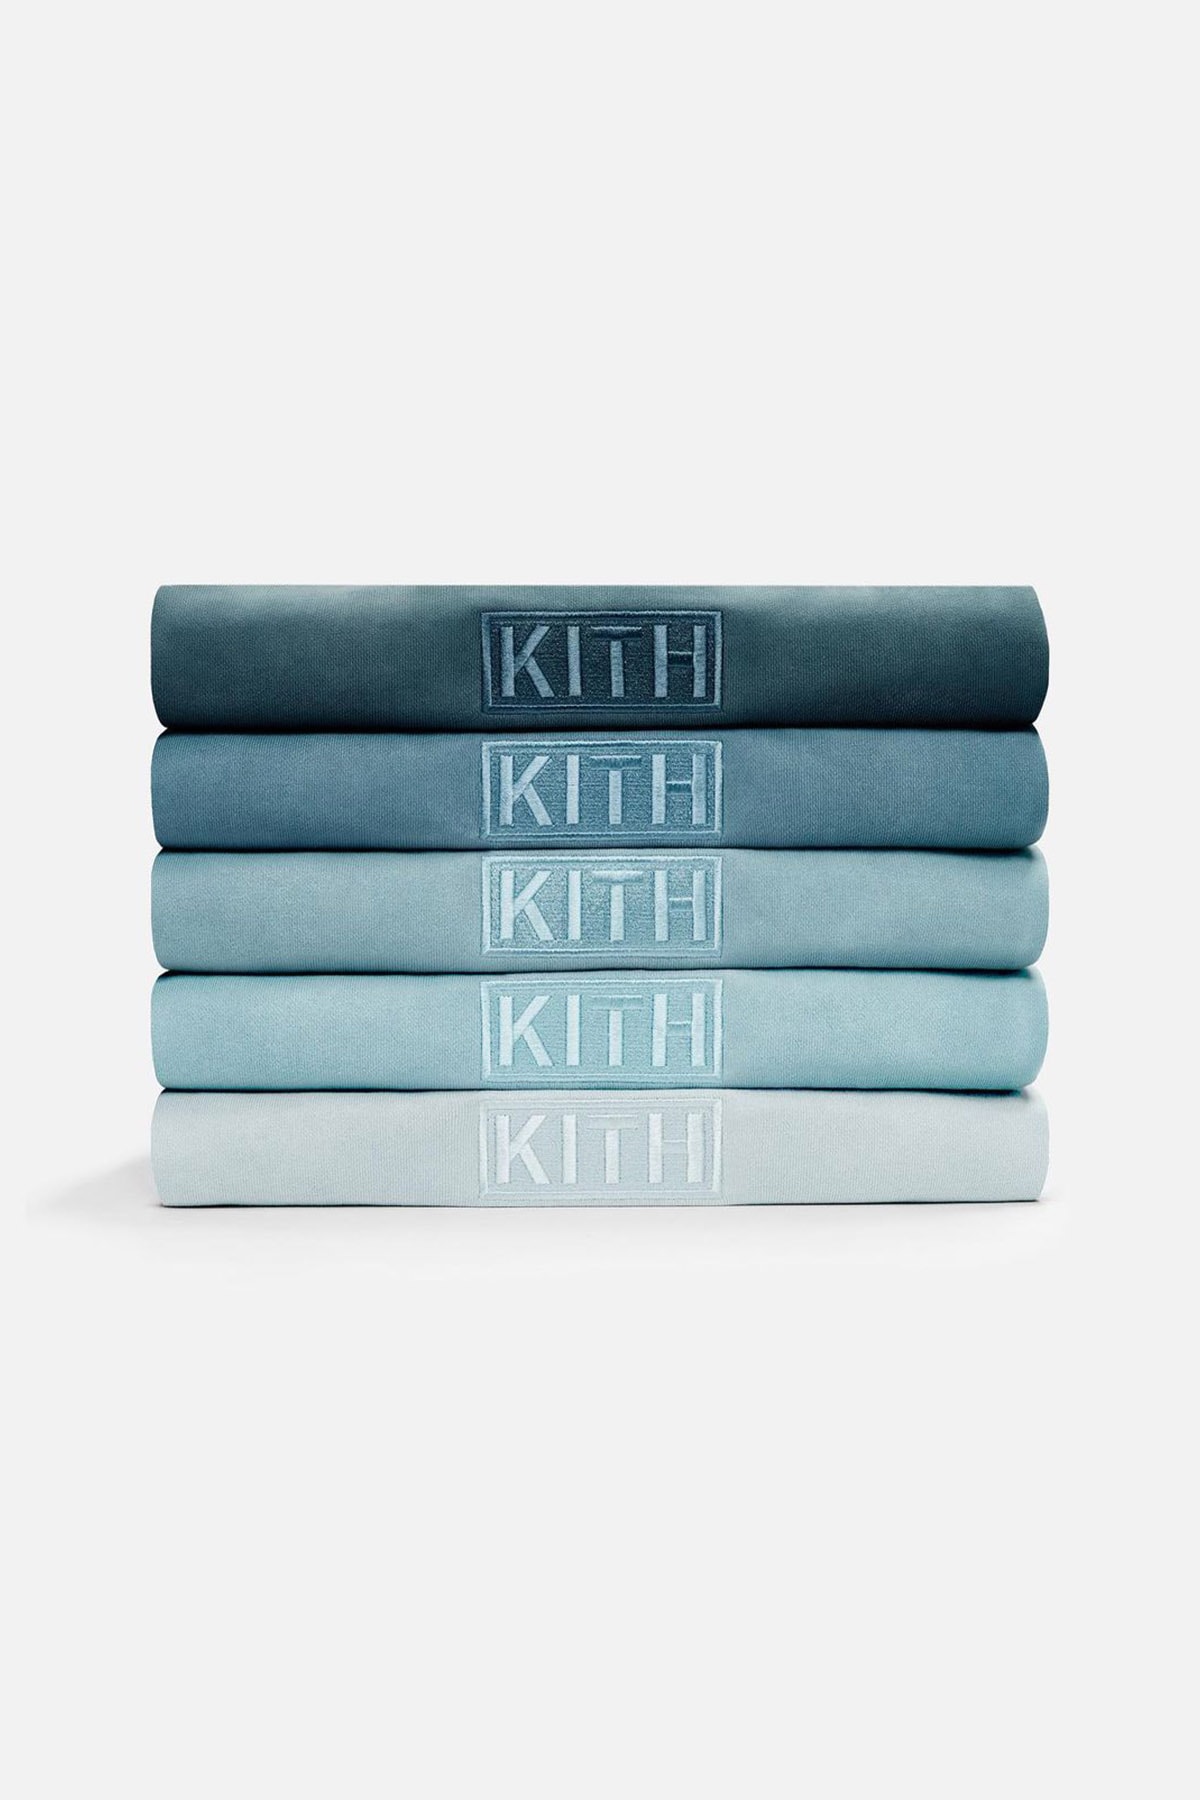 KITH 30 color Hoodie The Palette special Collection